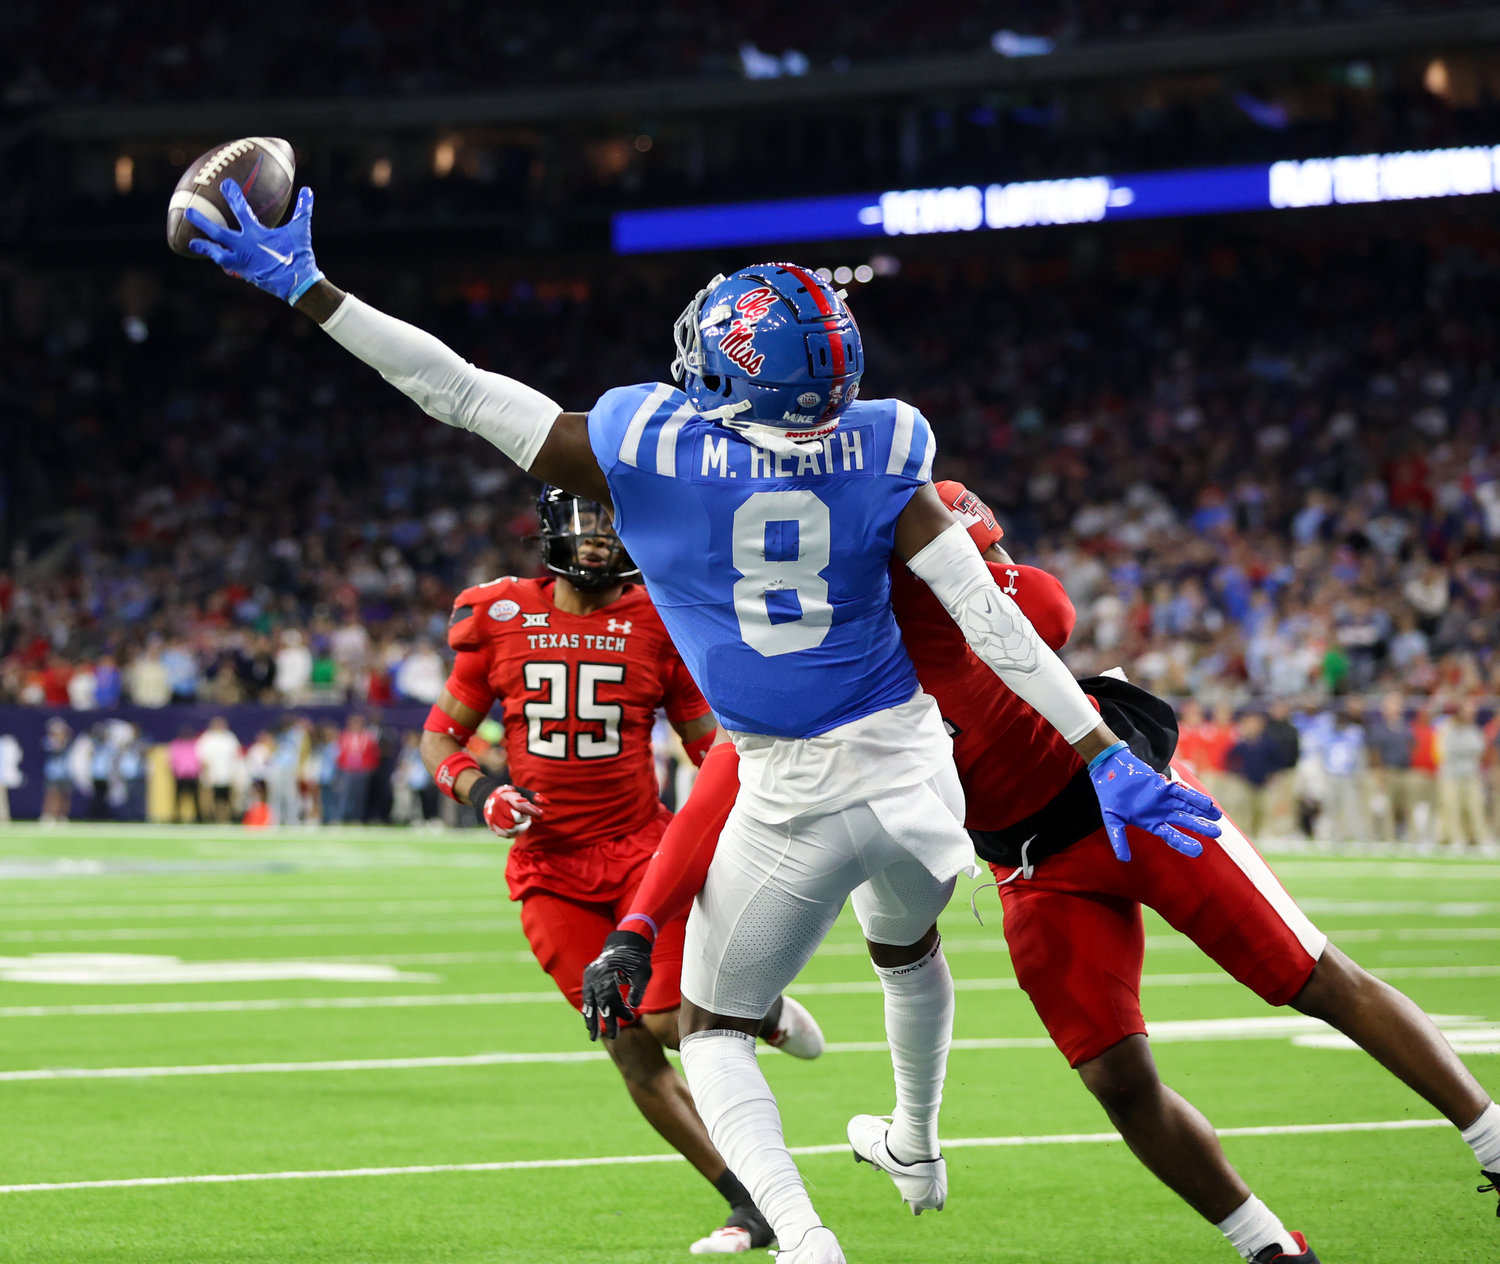 Mississippi wide receiver Malik Heath (8) just misses a would-be touchdown pass in the end zone during the TaxAct Texas Bowl on Dec. 28, 2022 in Houston.